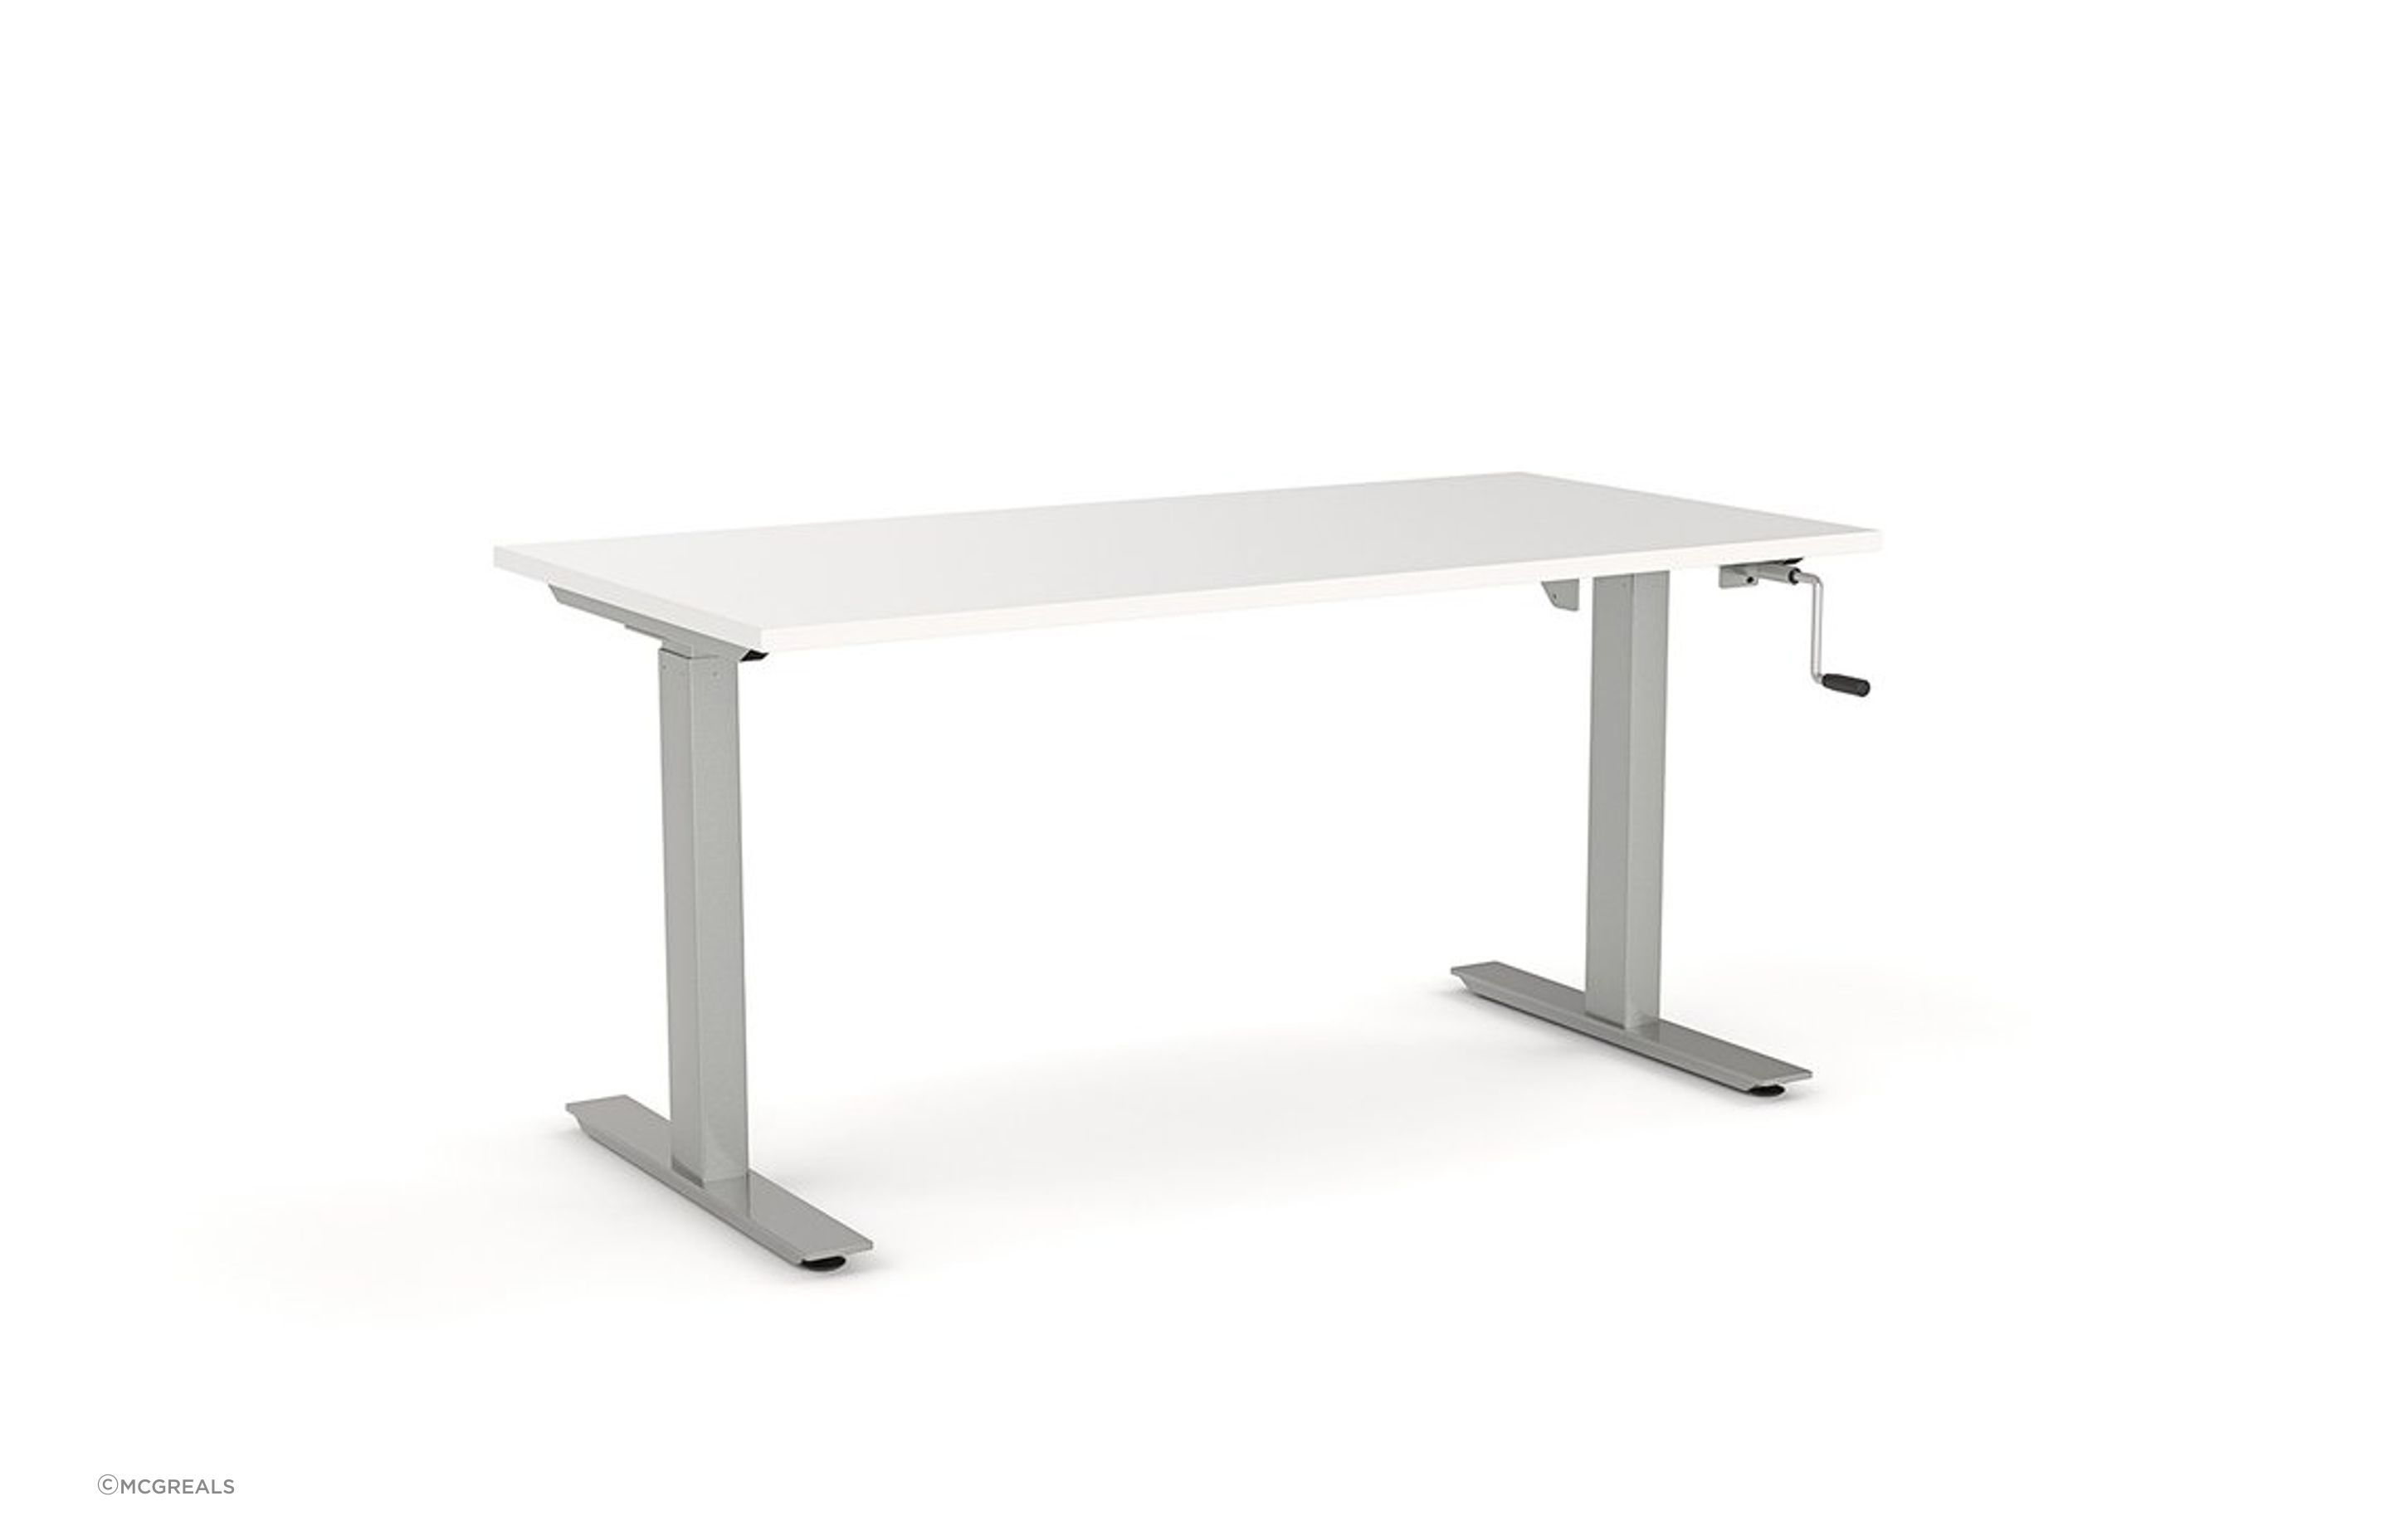 Hand crank desks are a great entry point to the world of adjustable desks.